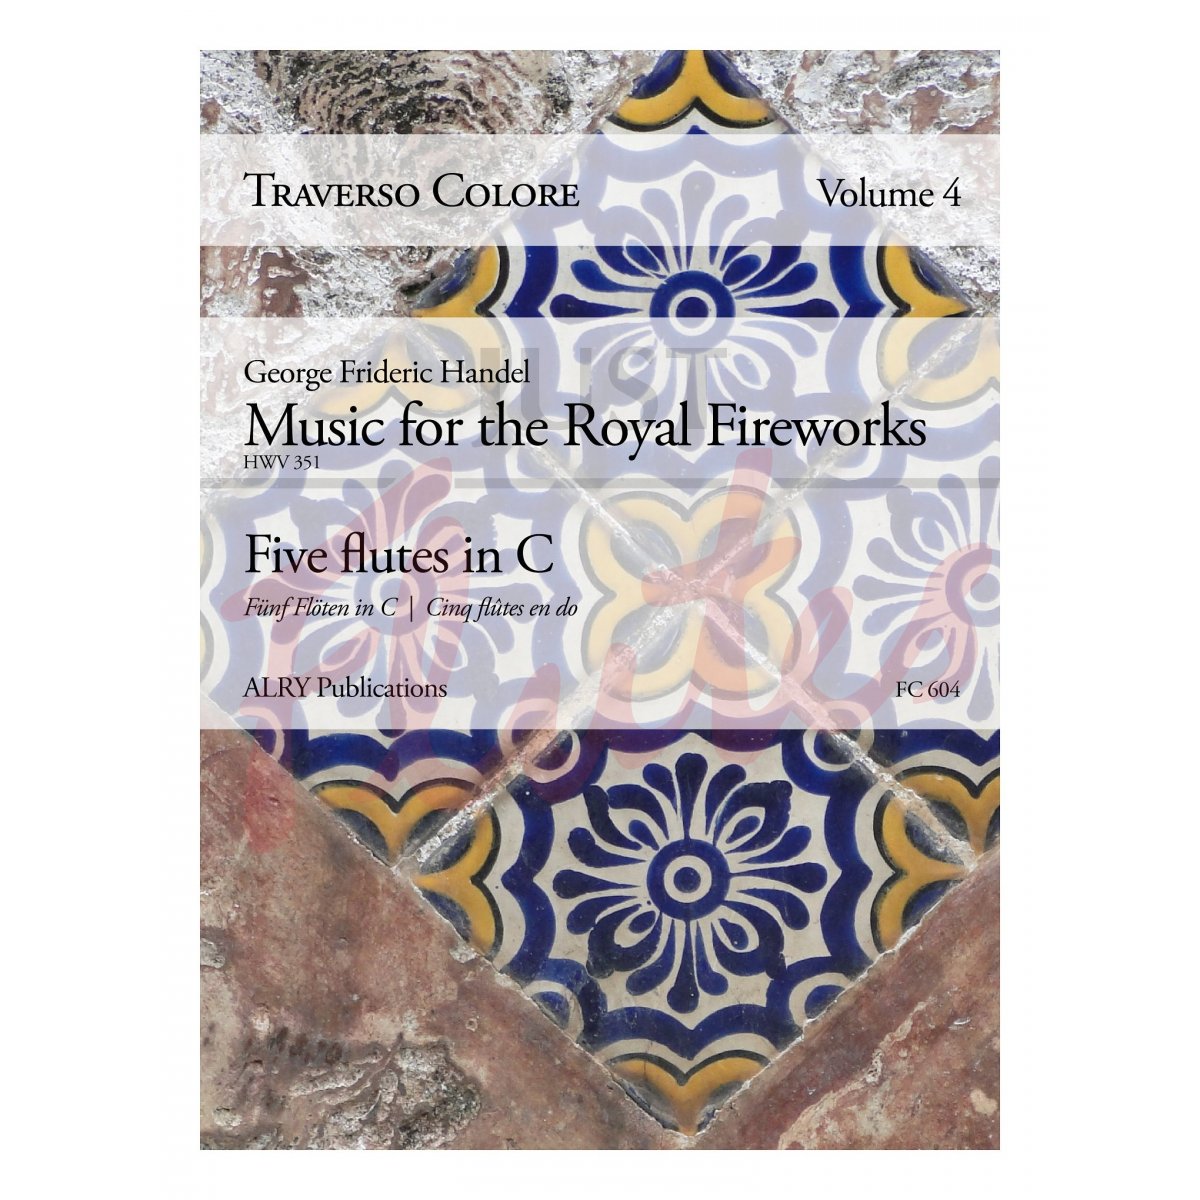 Traverso Colore, Volume 4 - Music for the Royal Fireworks for Five Flutes